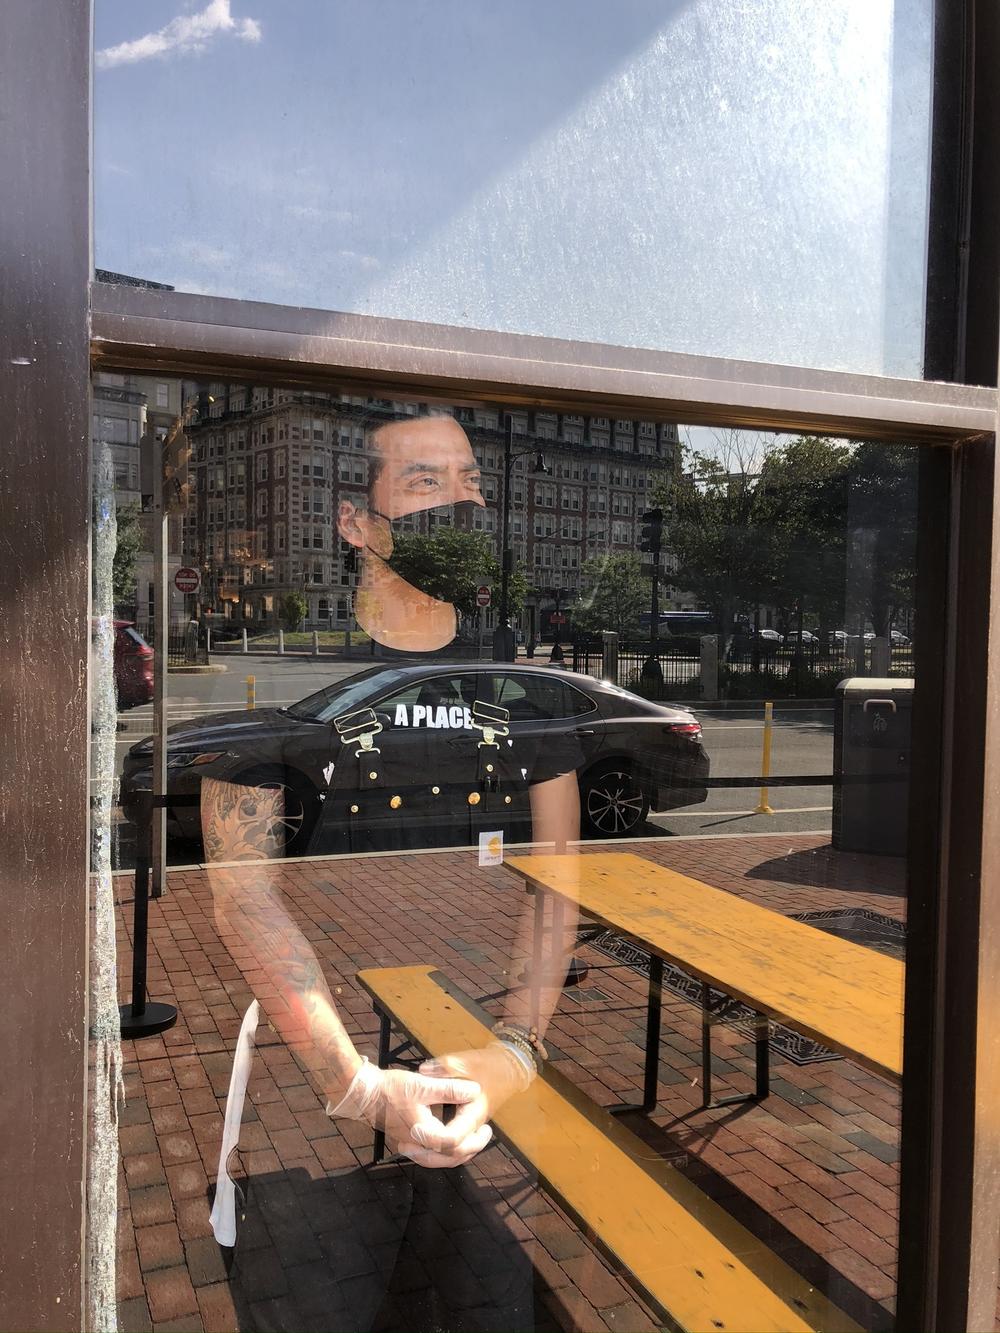 On Cornwall's first day open since the pandemic, business is slow, leaving server Miz Martinez long stretches of time to gaze out the window at the empty streets,  in the once-bustling Kenmore Square.